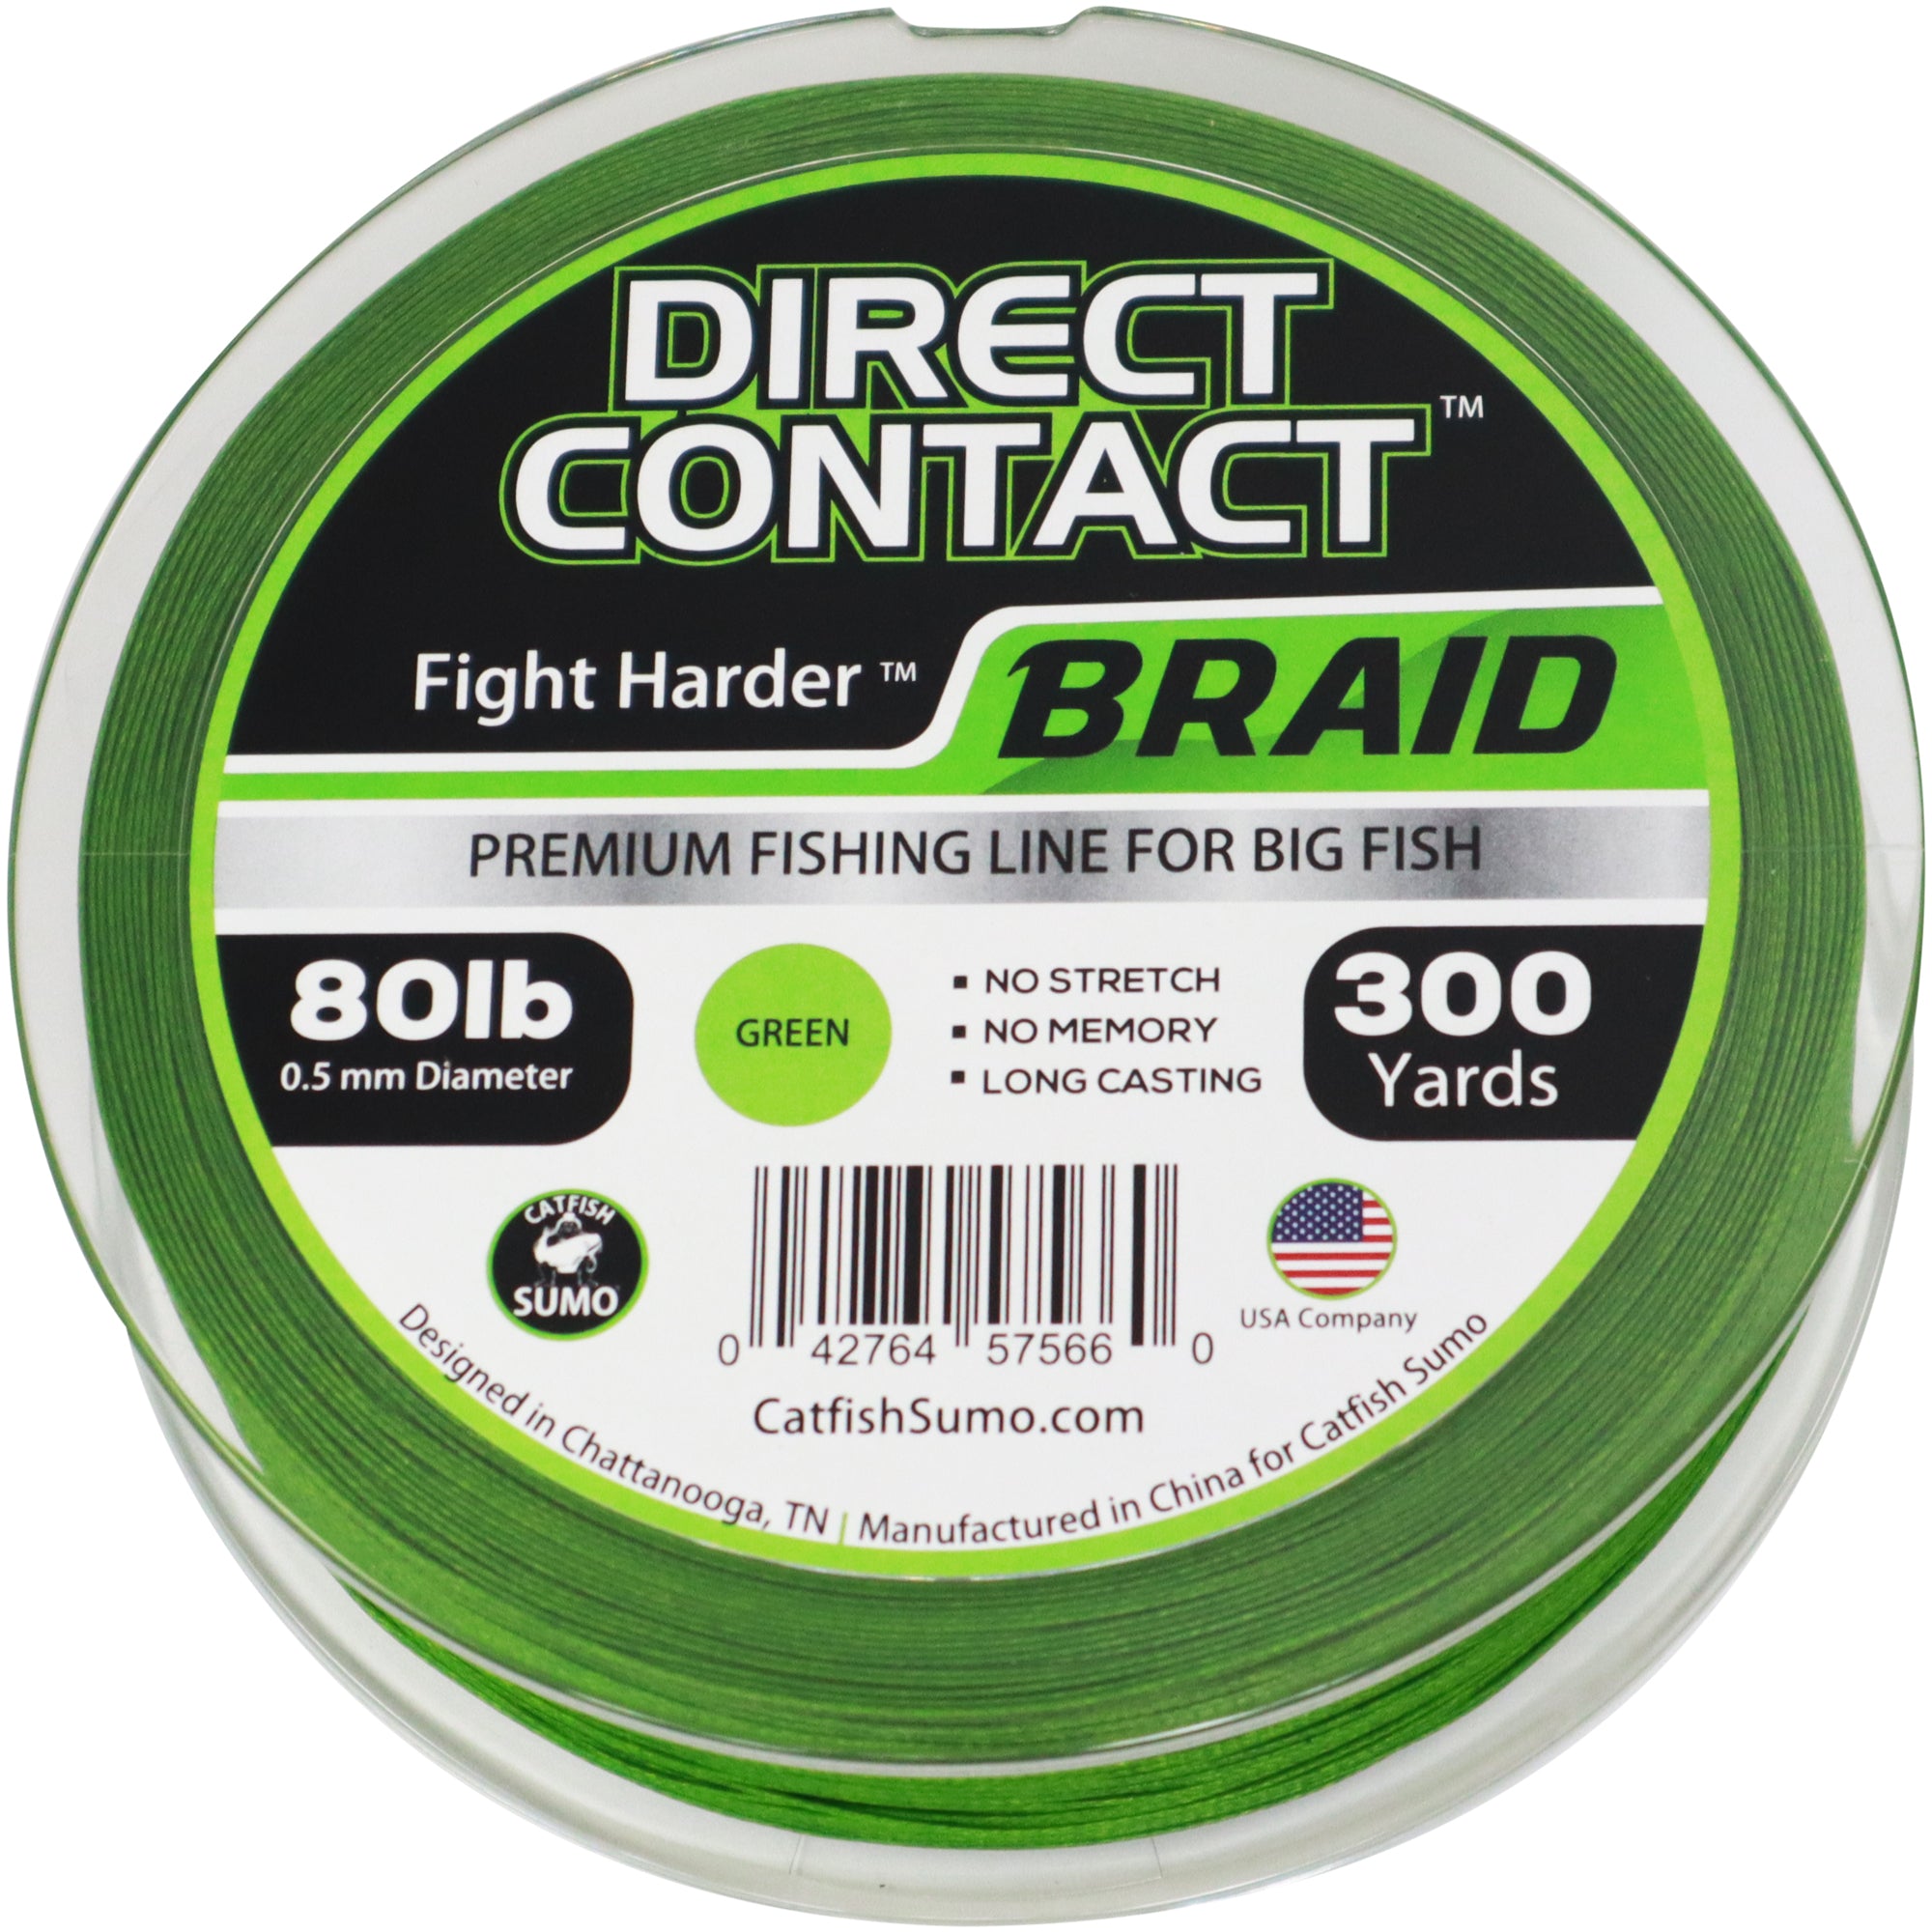 3937.01 Inch Nylon Fishing Line, Abrasion Resistant Braided Lines Main Line  Sub Line, Super Strong Pull Fishing Line For Freshwater Saltwater